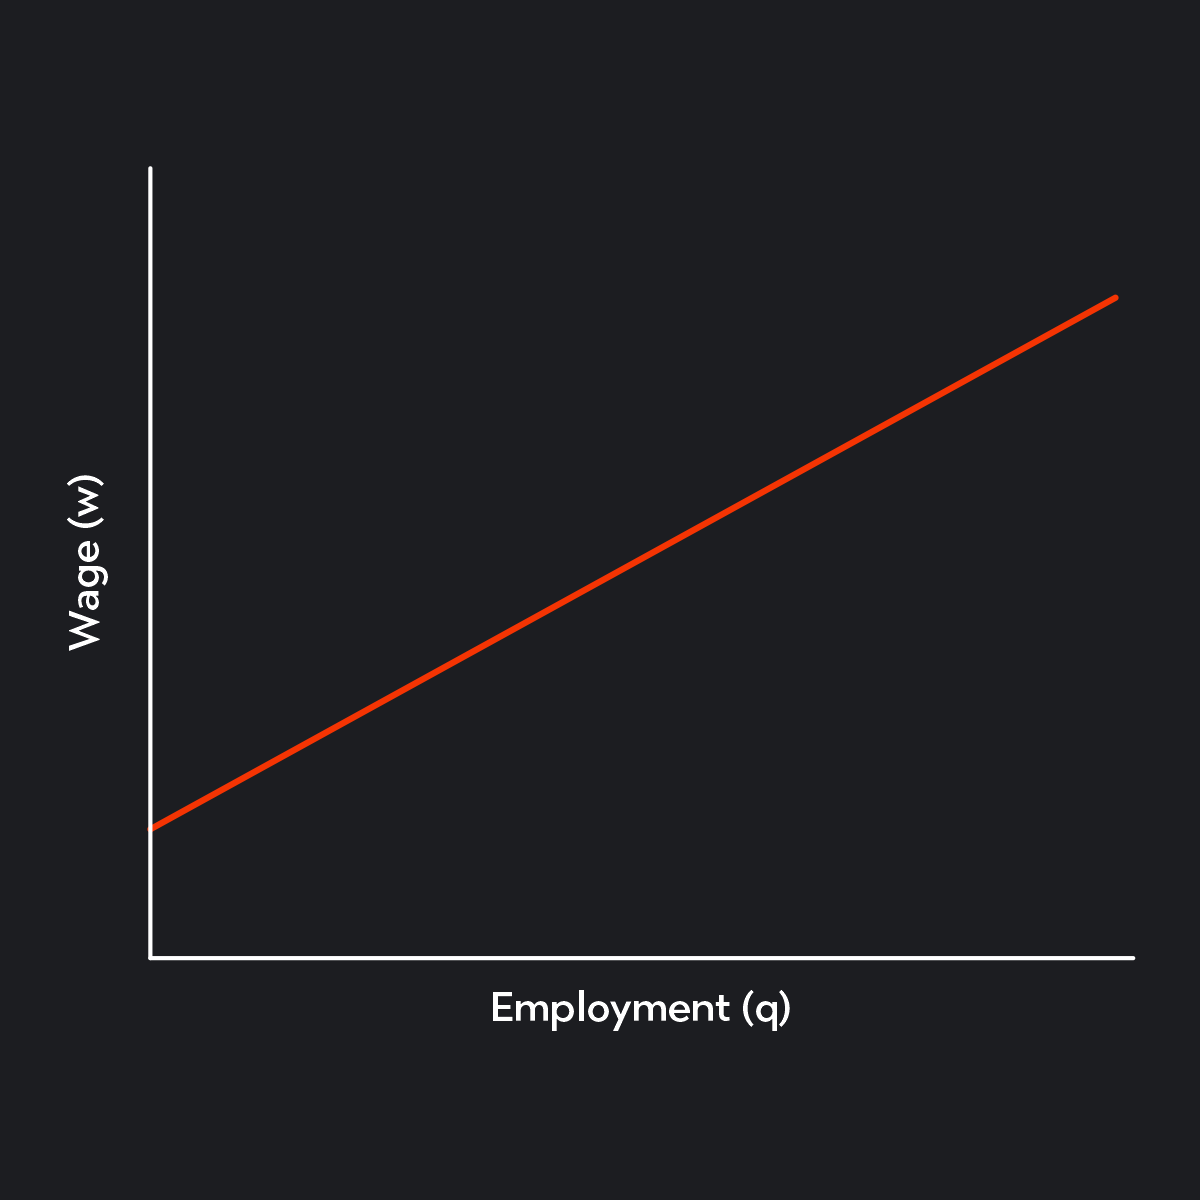 Graph showing that labor supply curve is upward sloping